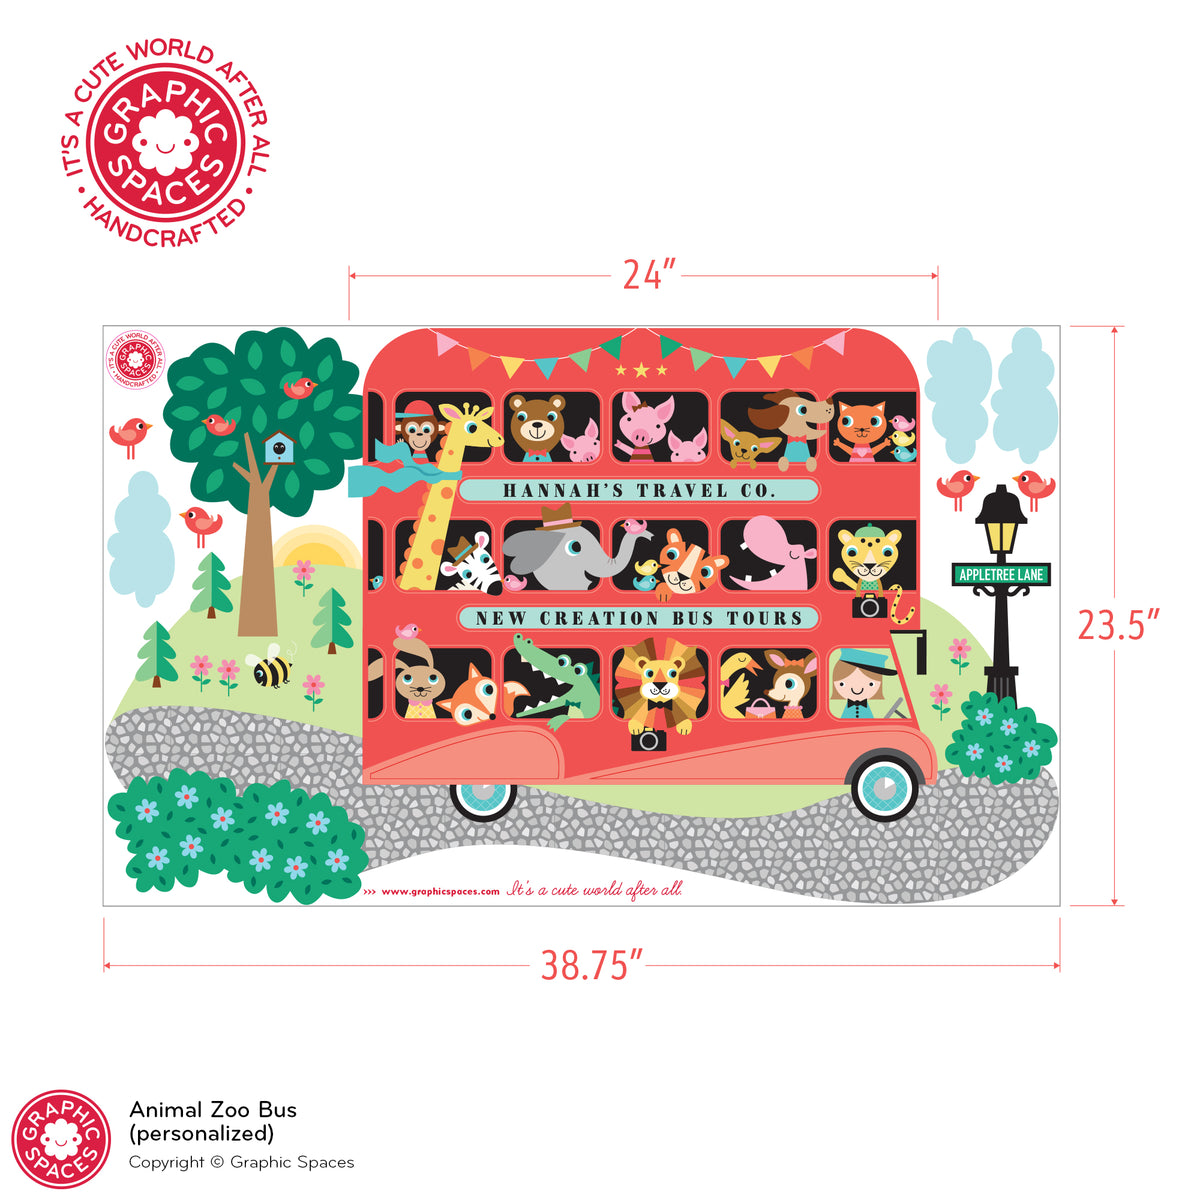 Animal Zoo London Bus Fabric Wall Decal, Personalized GIRL